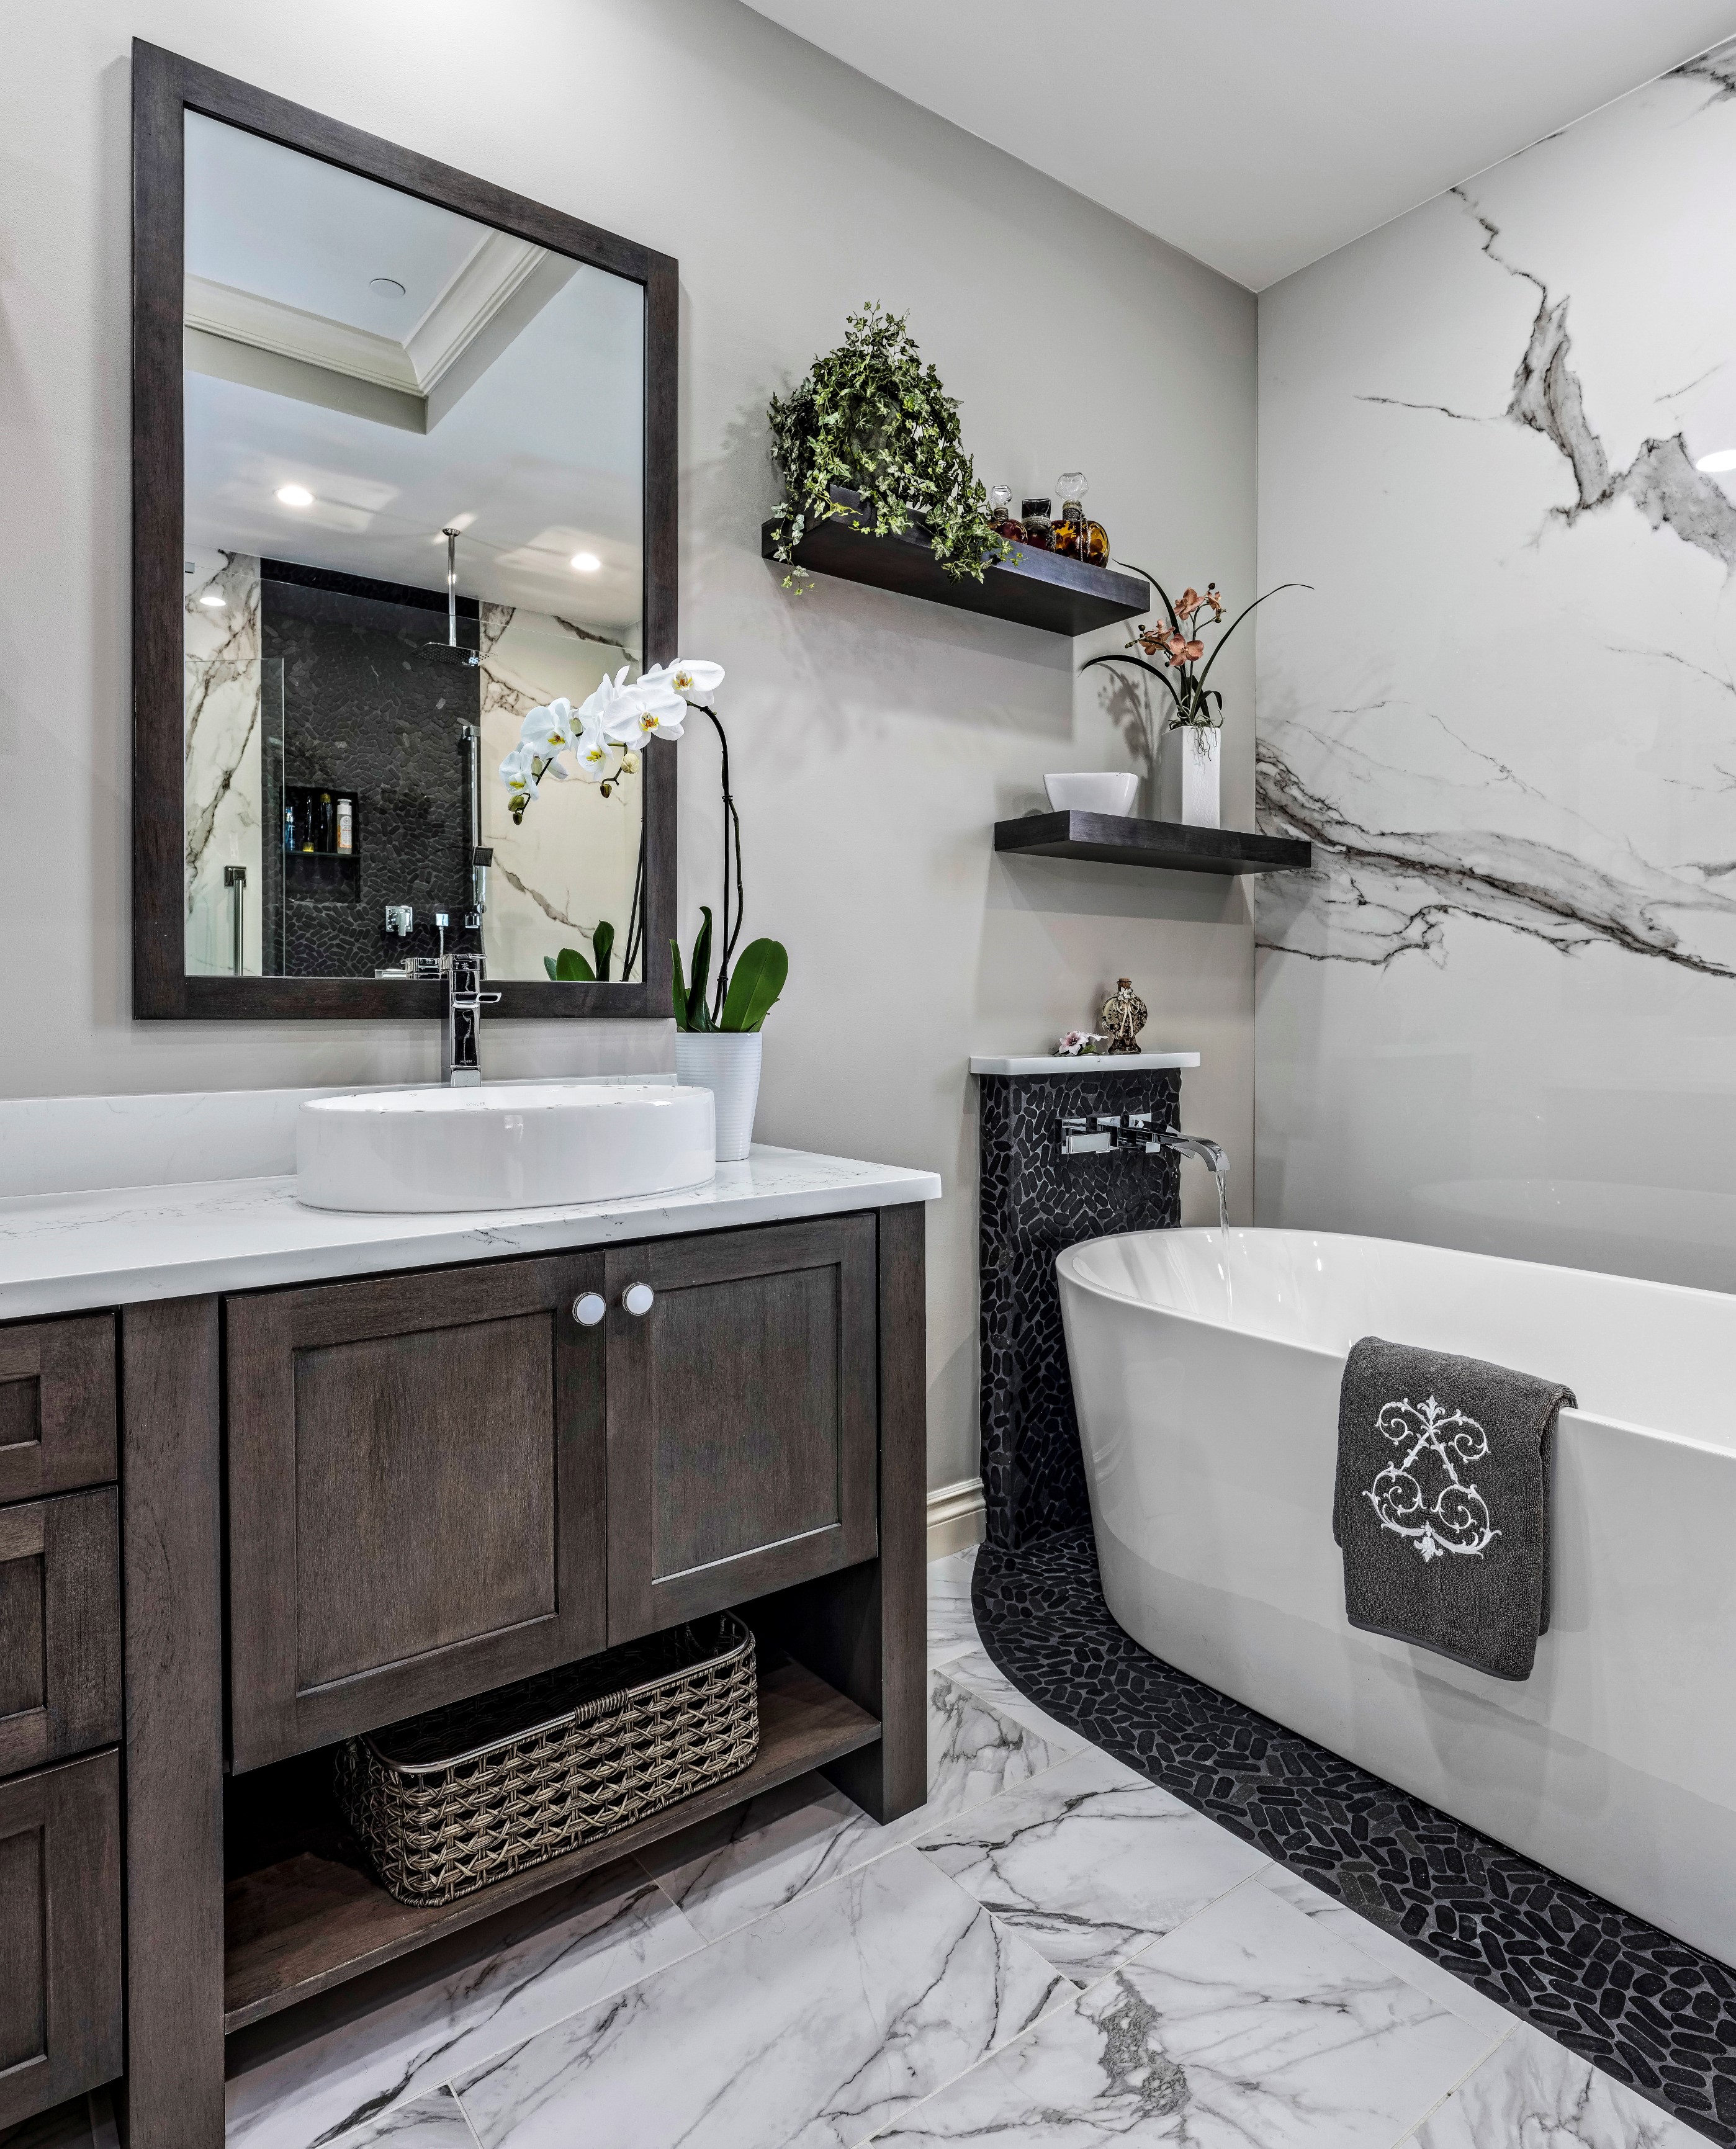 Bathroom Remodeling Typically Cost, How Much Does It Cost To Remodel A Very Small Bathroom